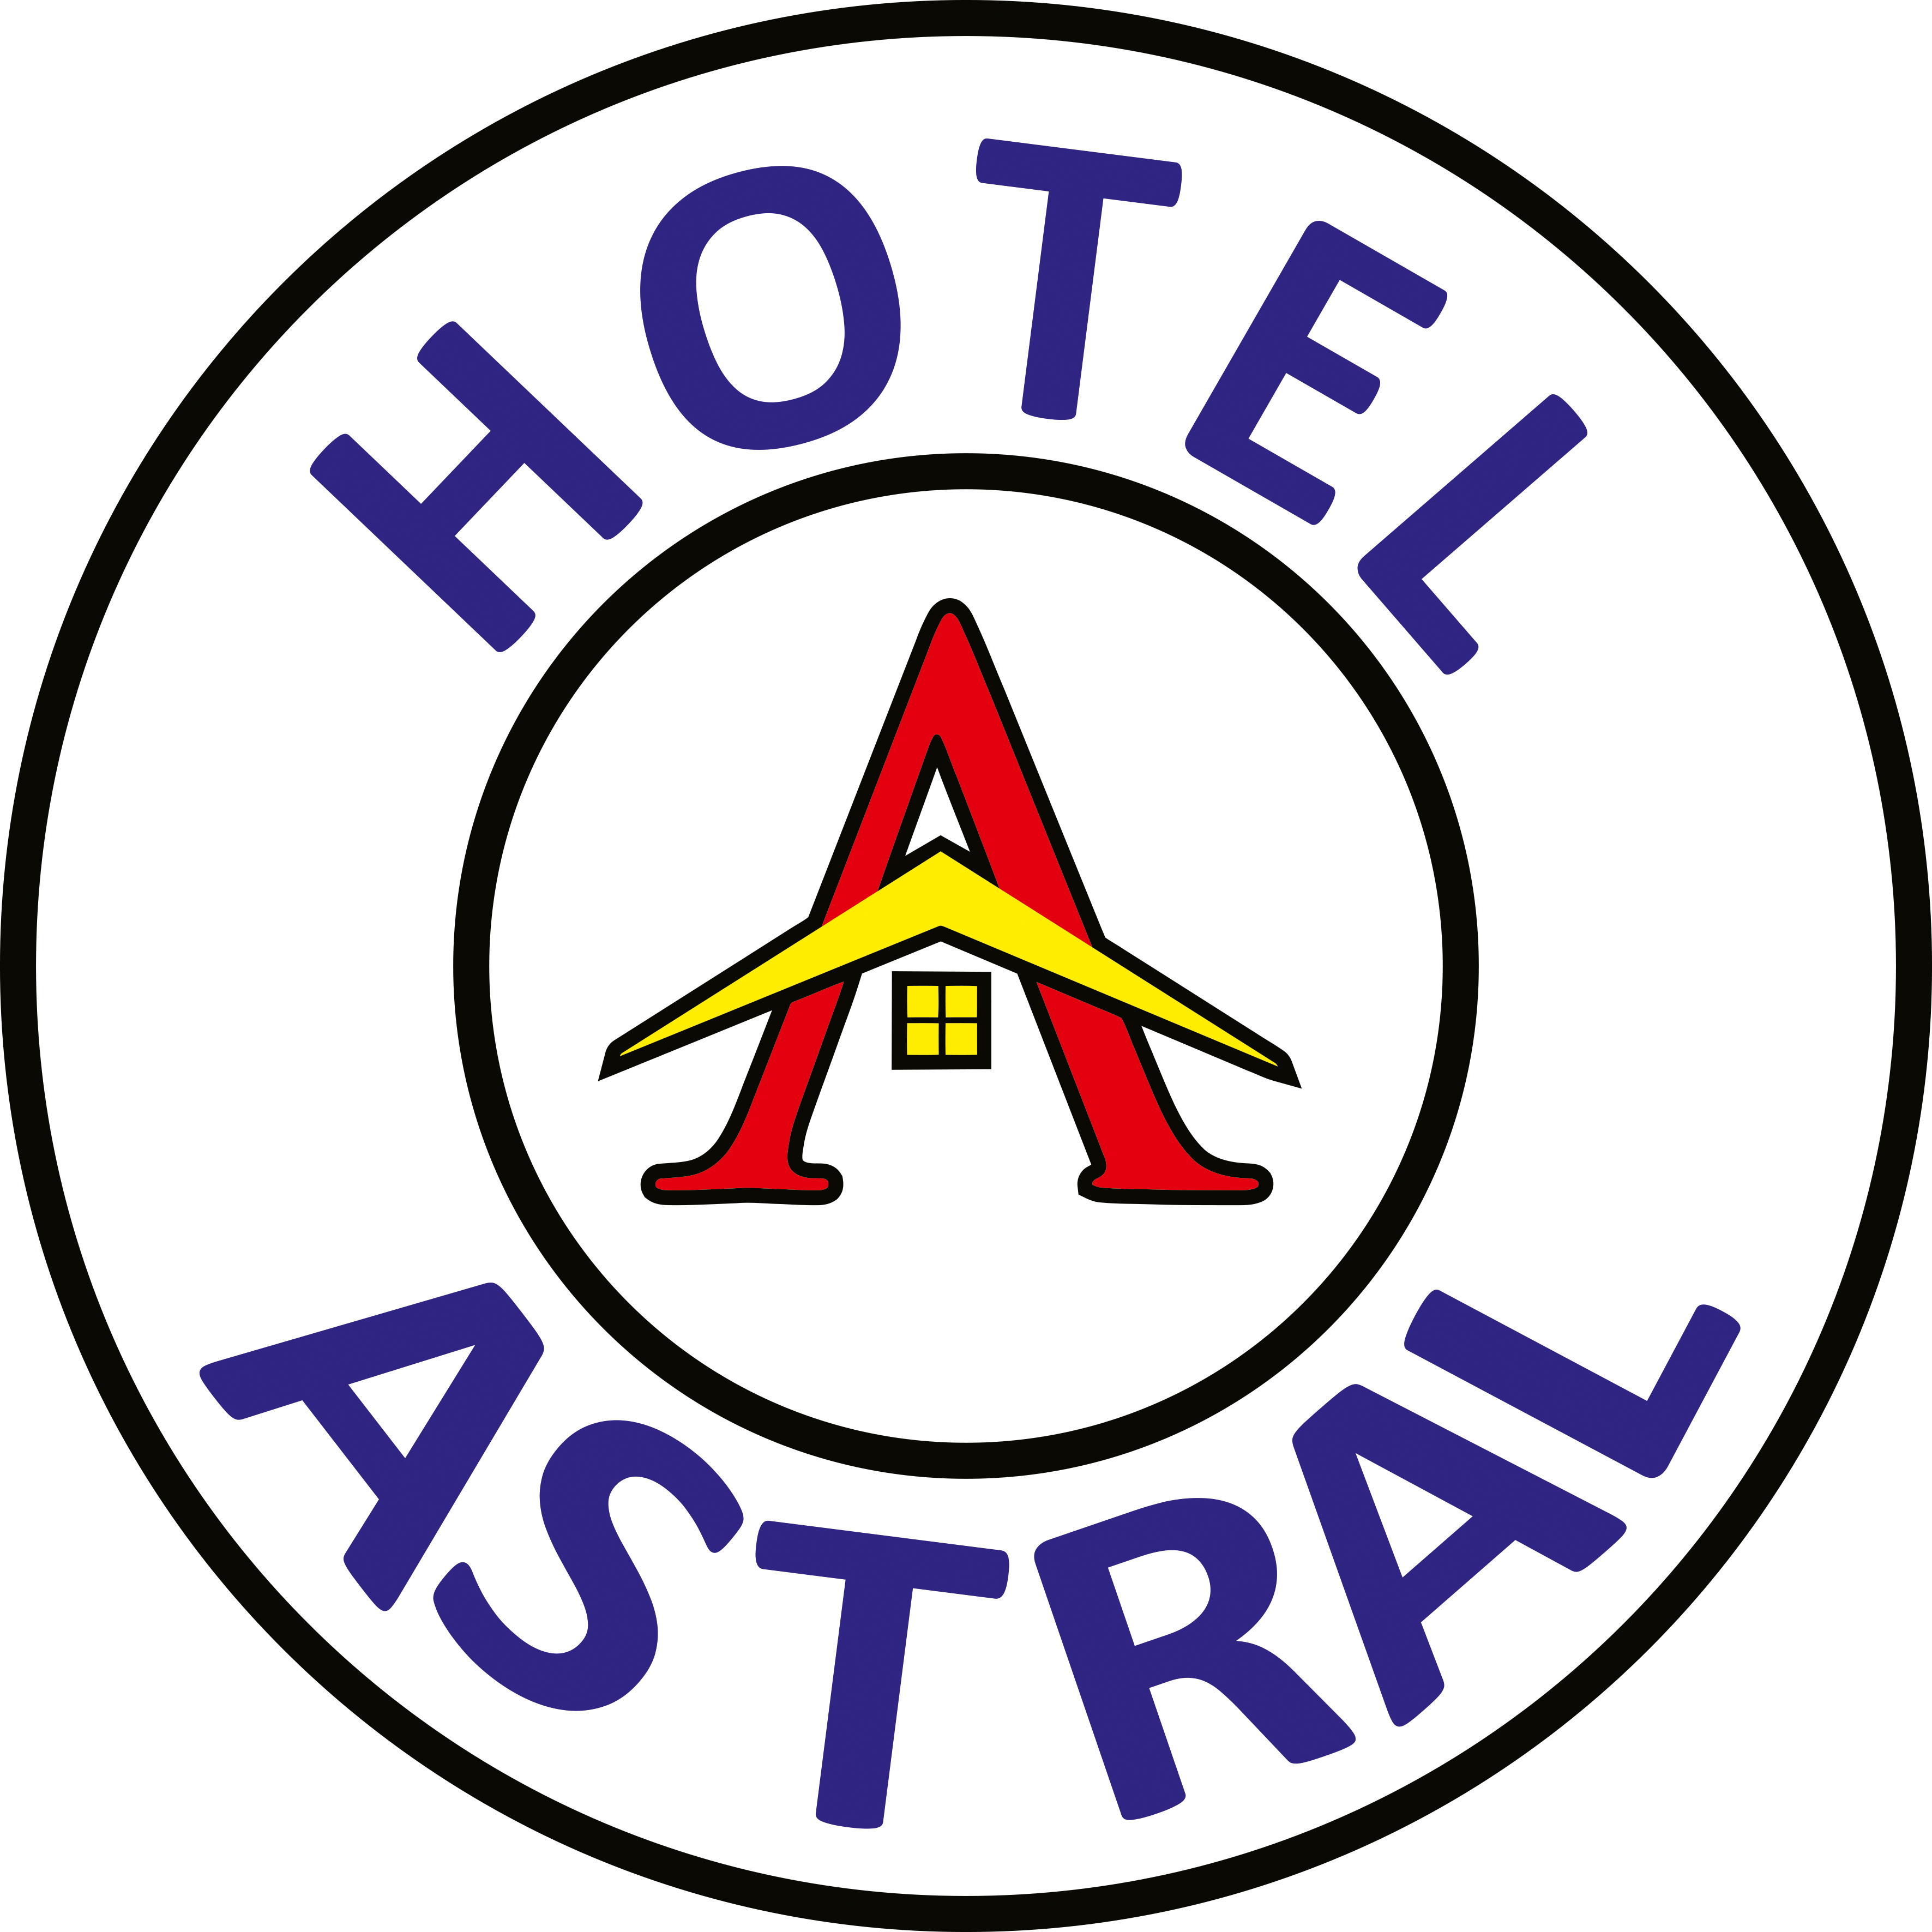 Astral Hotel